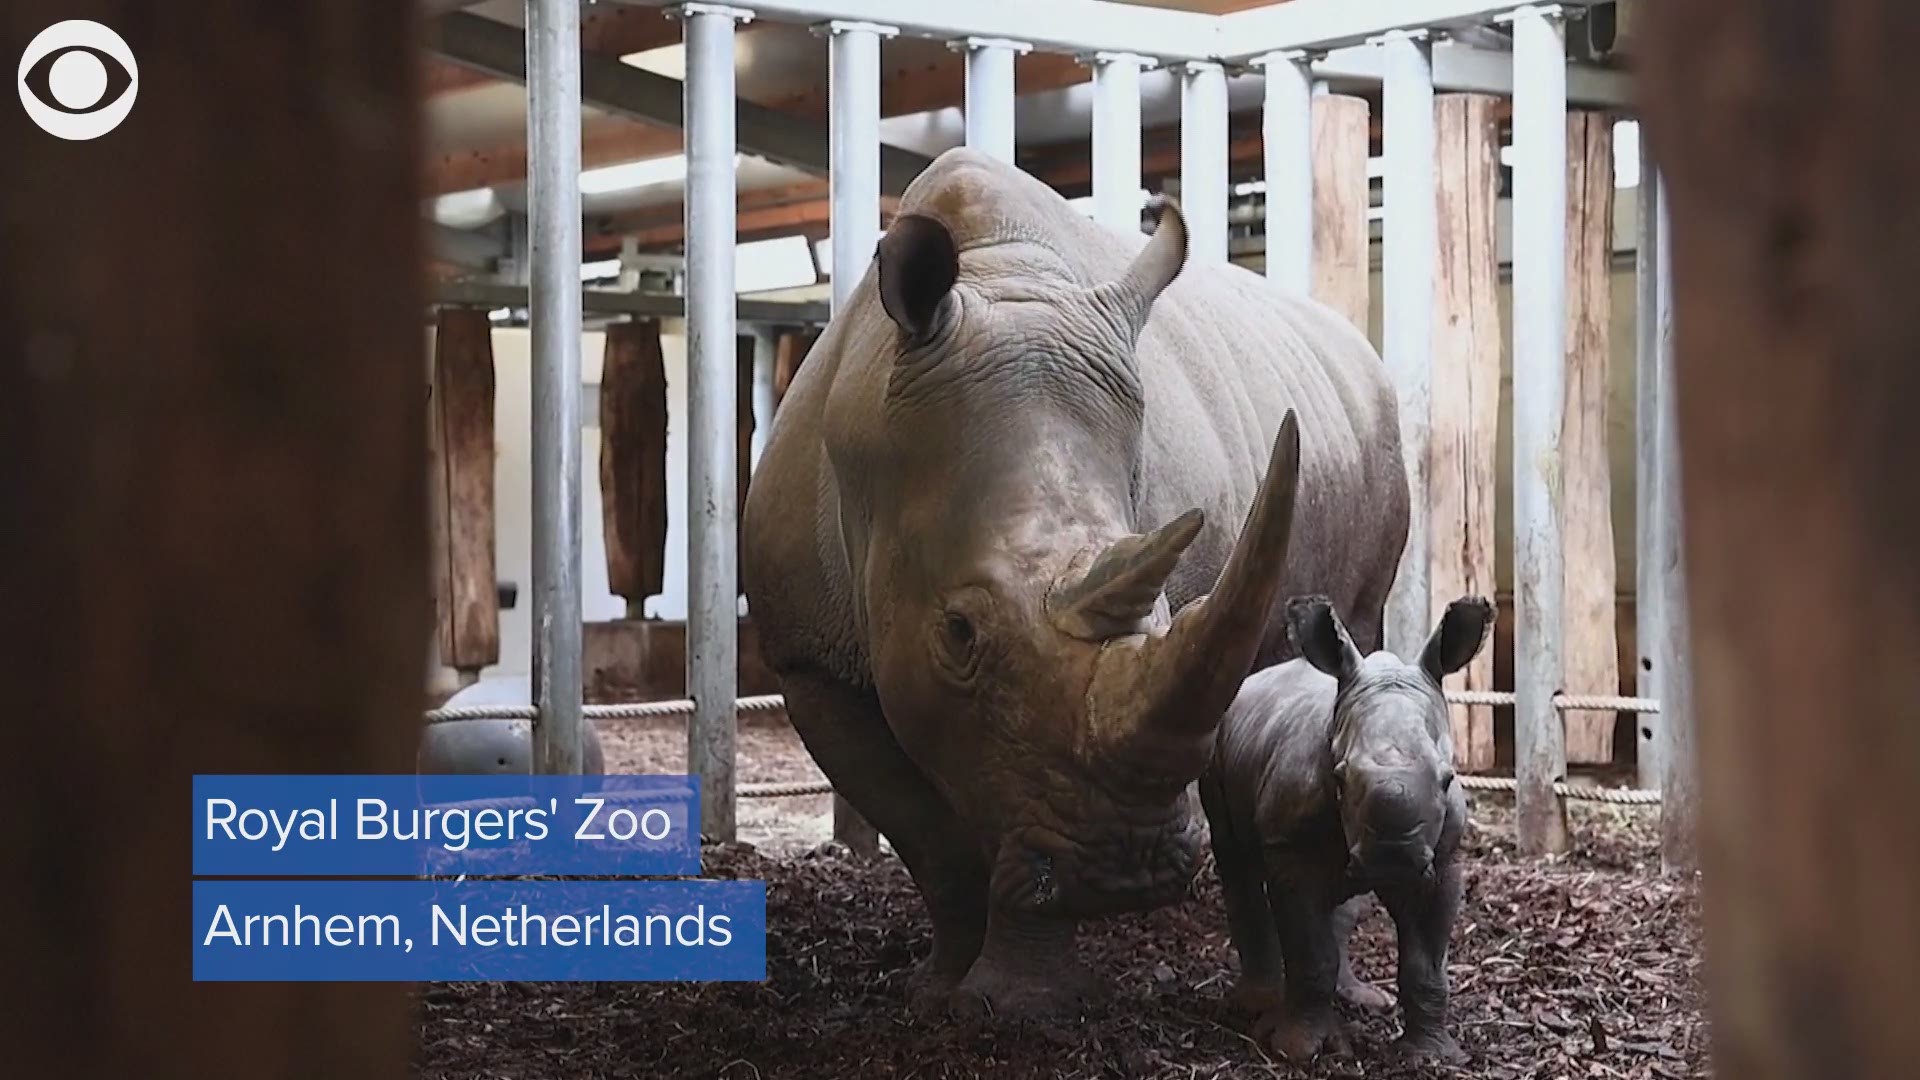 ADORABLE: This is Douwe, a baby rhinoceros born on Easter at the Royal Burgers' Zoo in the Netherlands.